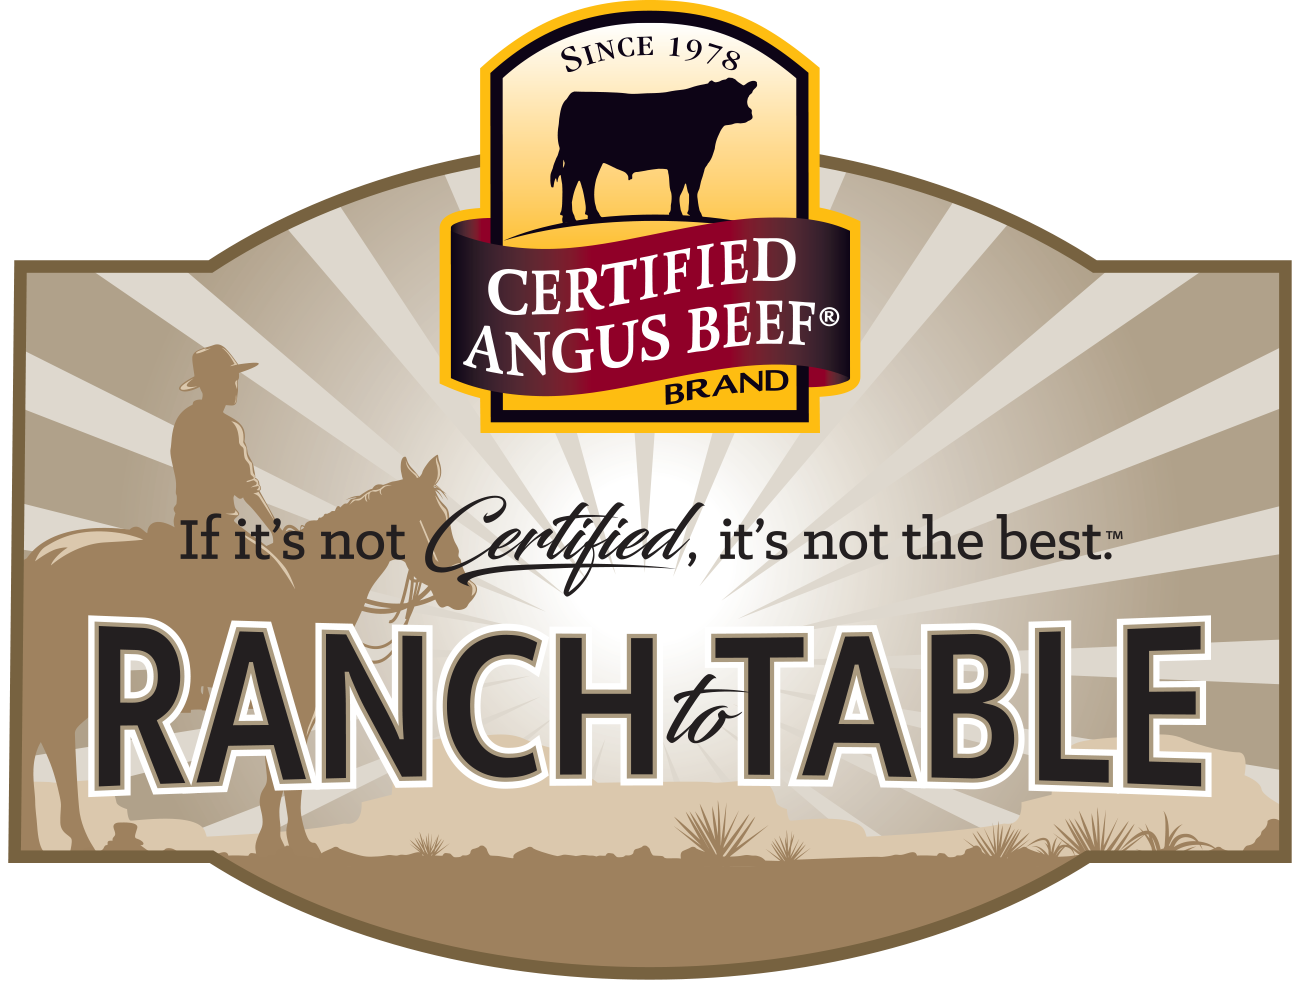 Image of Ranch to Table logo